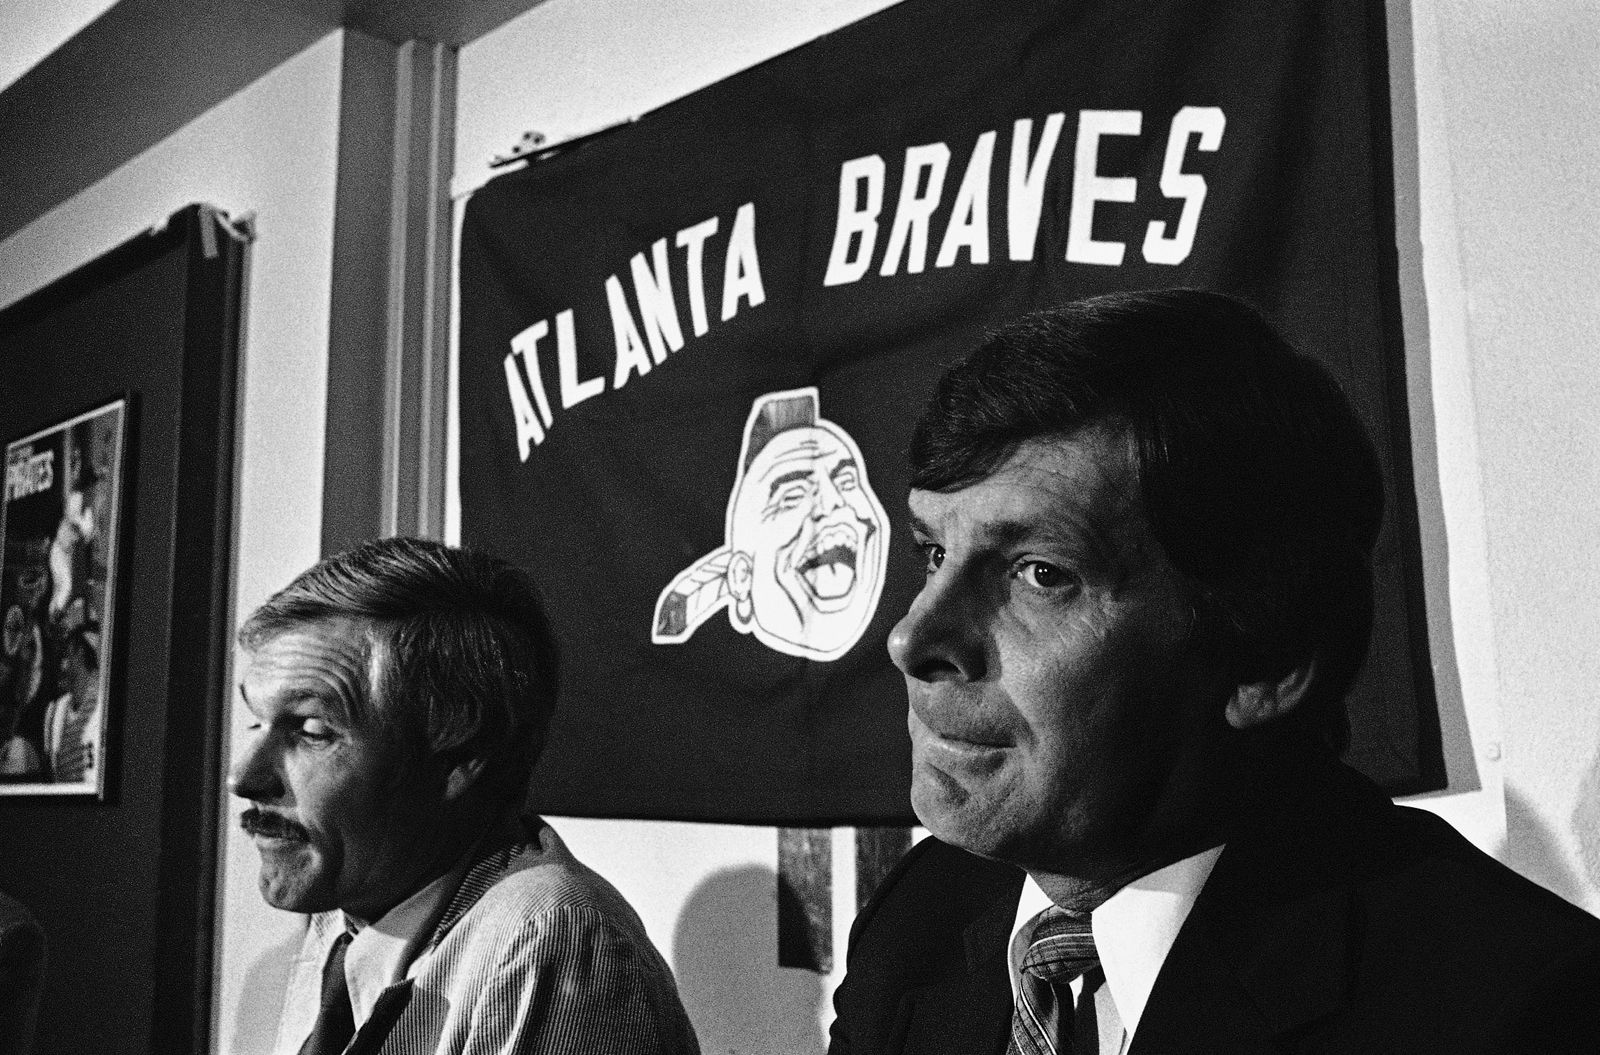 In 2013, the Braves considered bringing back their logo they retired after 1989, seen in the background here in this 1981 photo, on spring training hats however outrage prompted them to change the logo.

FILE. Bobby Cox (right) listens as Atlanta Brave Owner Ted Turner (left) announces at a news conference on Thursday, Oct. 8, 1981 in Atlanta that Cox would not be manager of the ball club next season. Cox has been with th Braves since 1978.   No replacement was named. (AP Photo/ Joe Holloway)